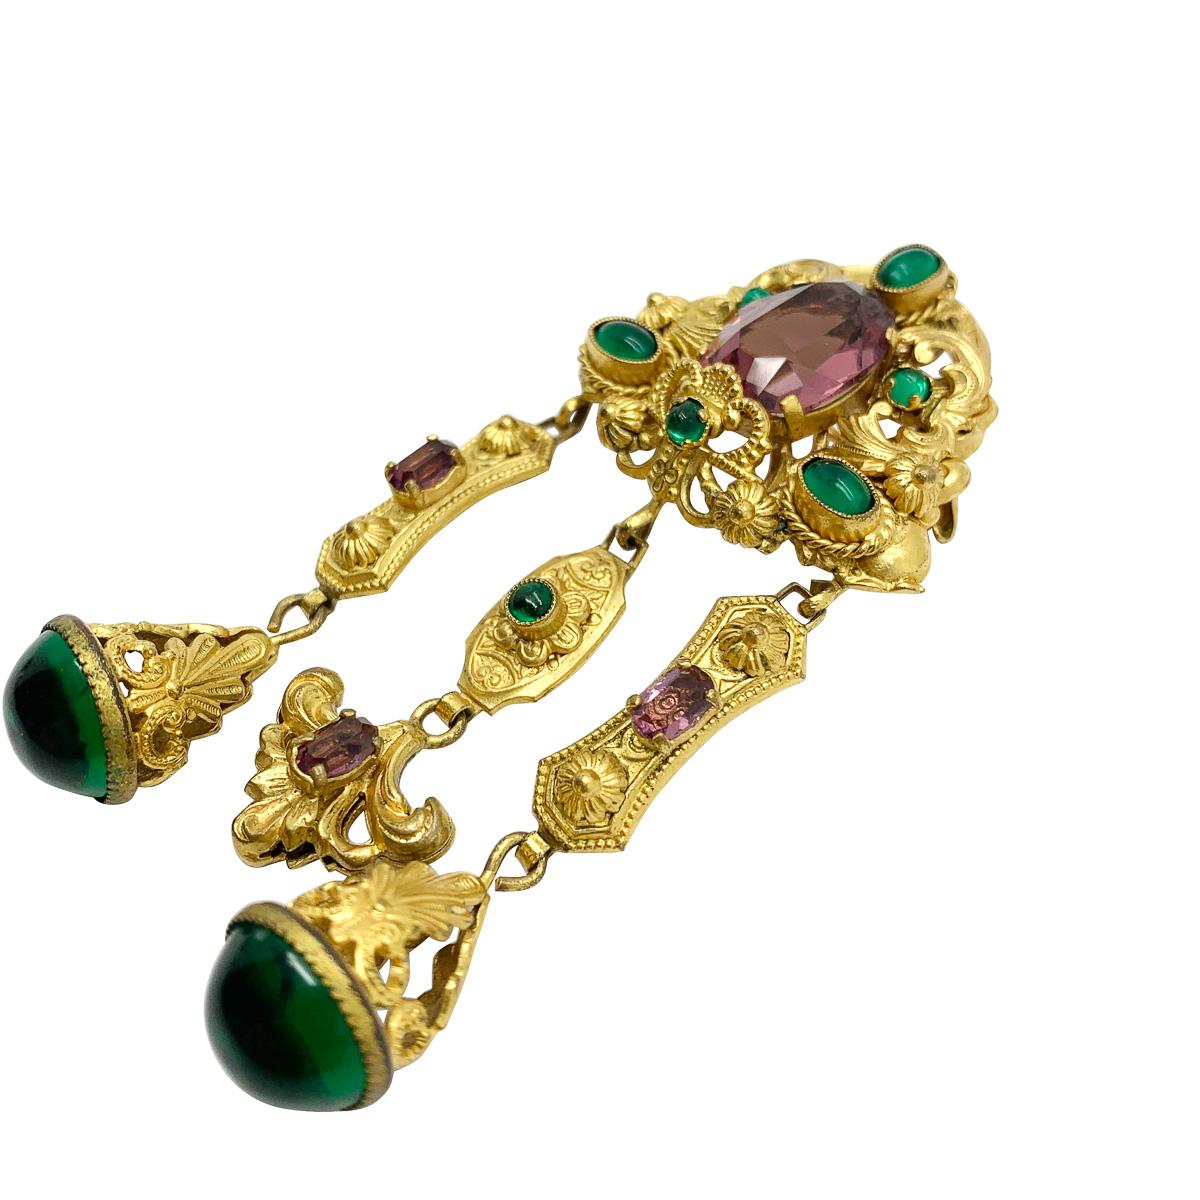 A supreme vintage Czechoslovakian filigree brooch made during the 1910s-20s era. Mesmerizingly beautiful, the brooch, having survived for around a century, boasts incredible craftsmanship and an exquisitely chosen array of crystal stones and colours